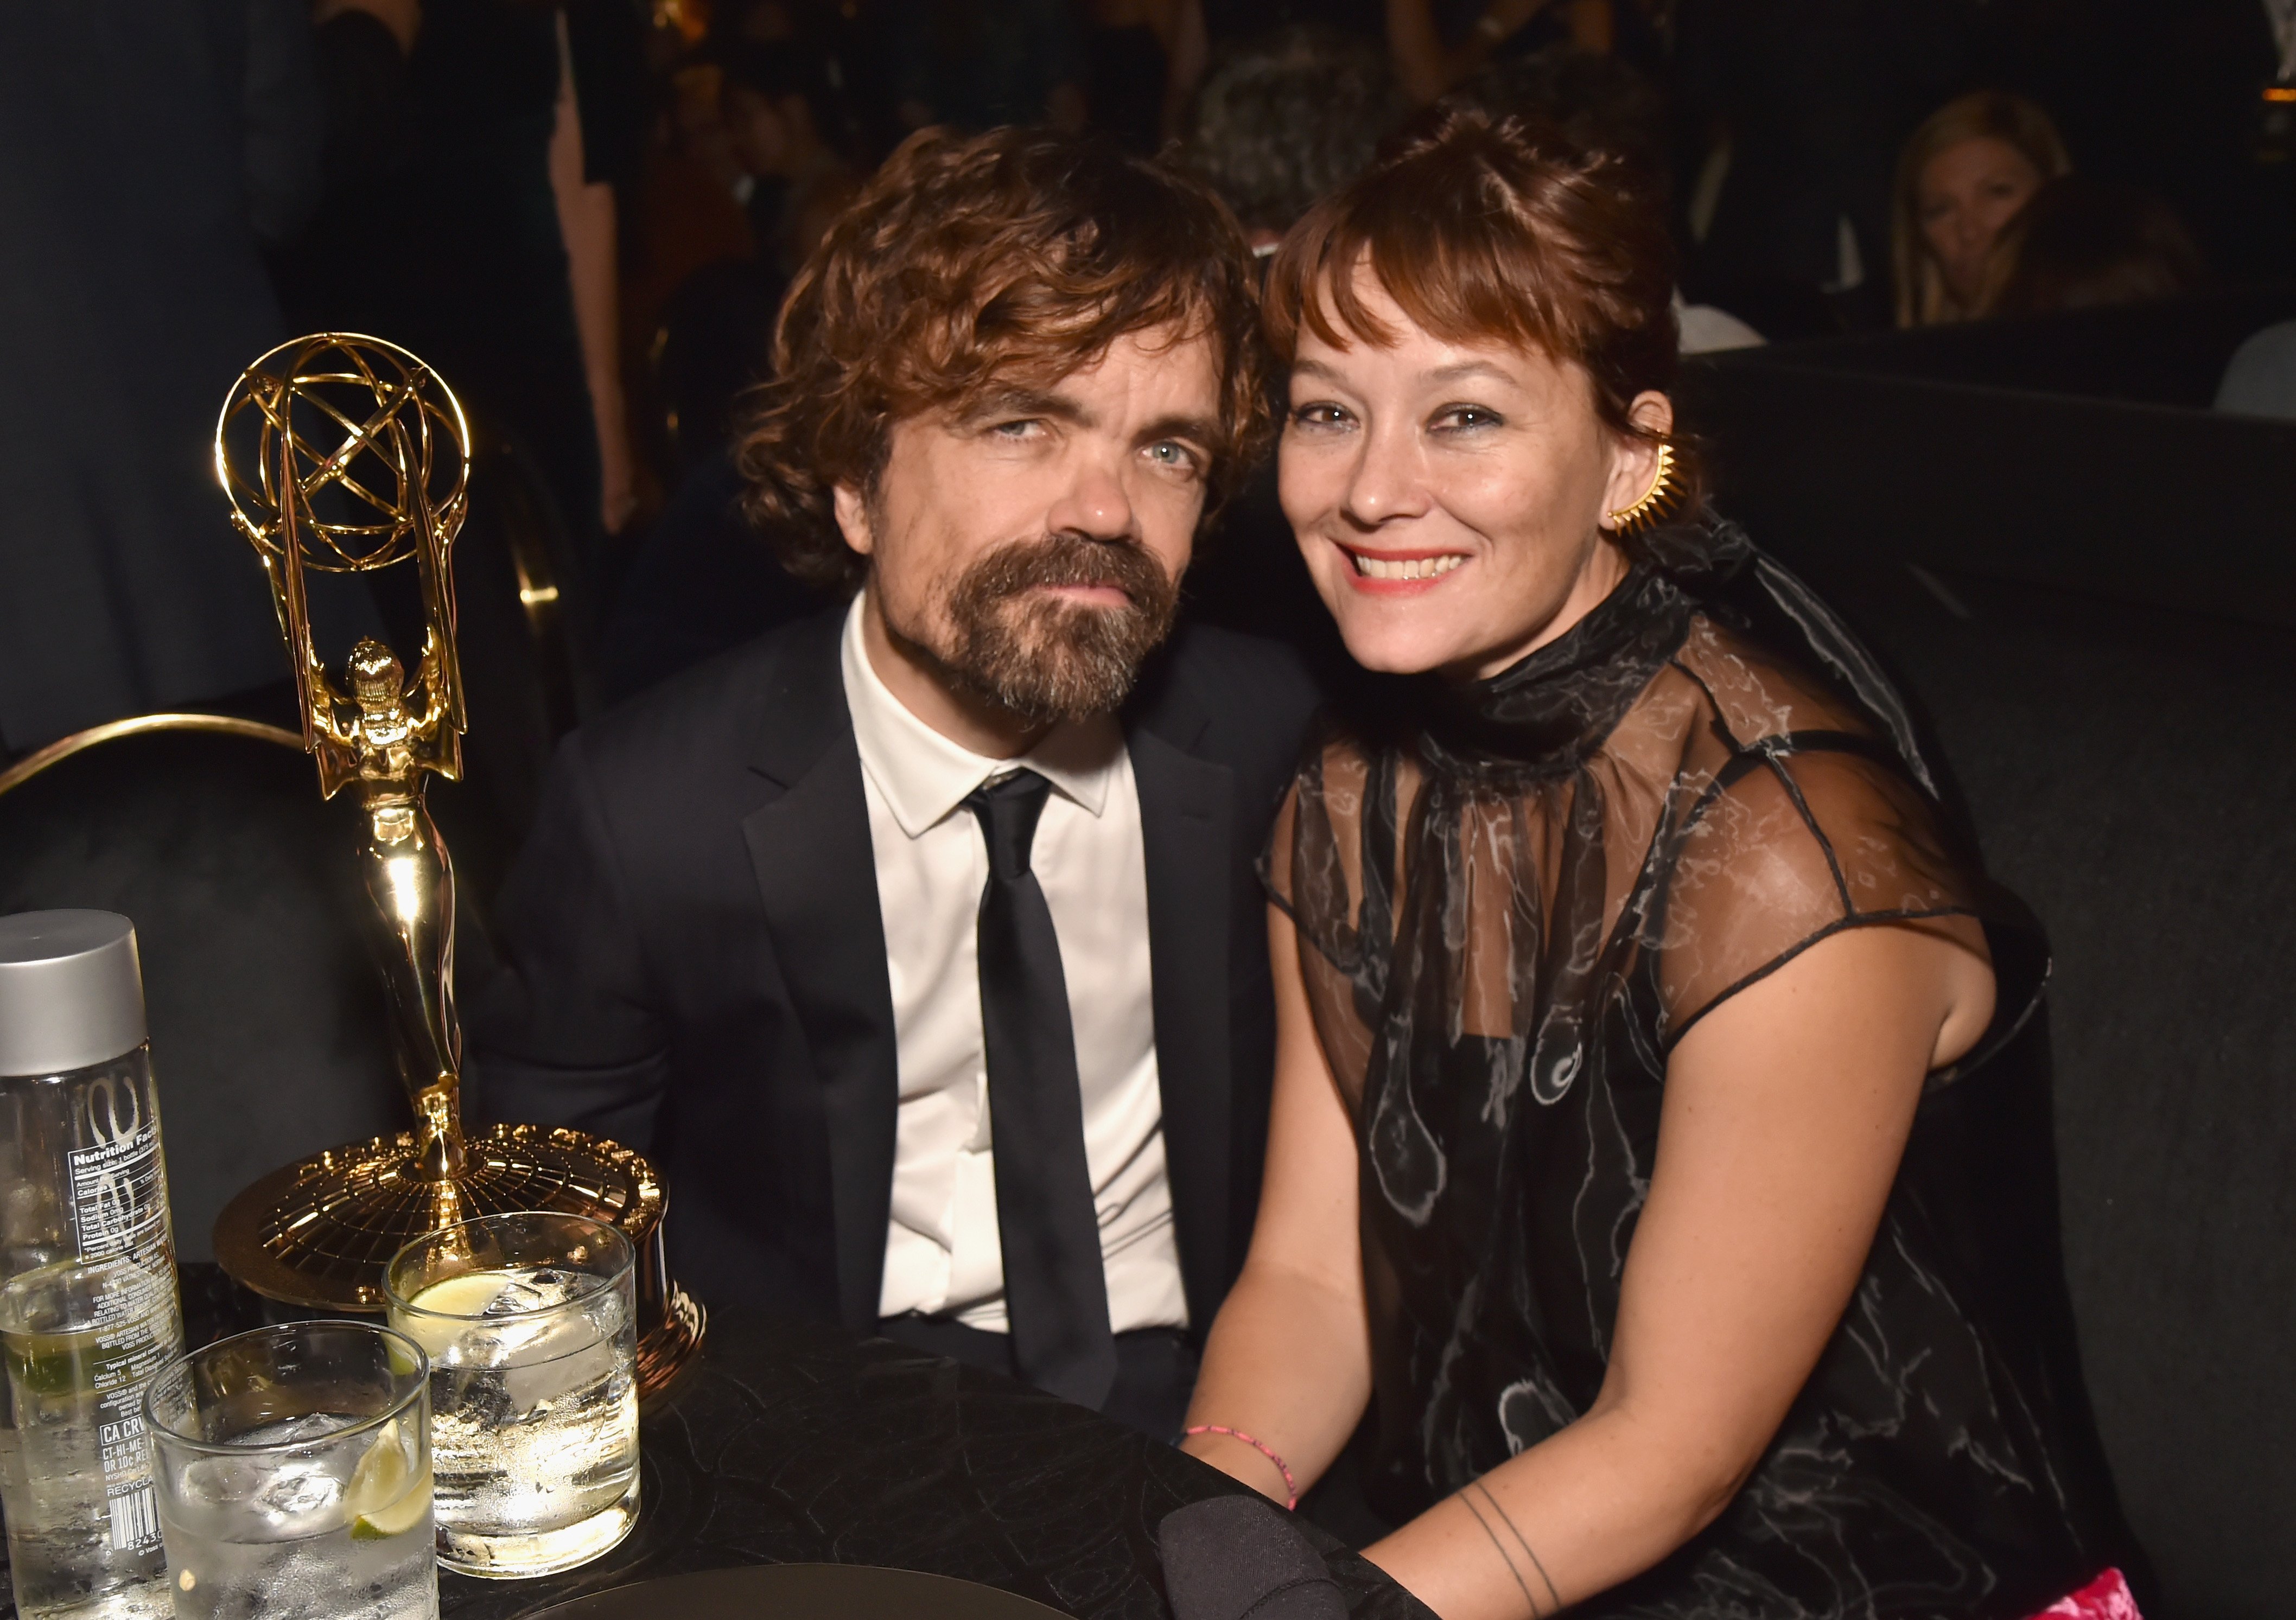 Peter Dinklage and Erica Schmidt during HBO's Official 2018 Emmy After Party on September 17, 2018 in Los Angeles, California. | Source: Getty Images